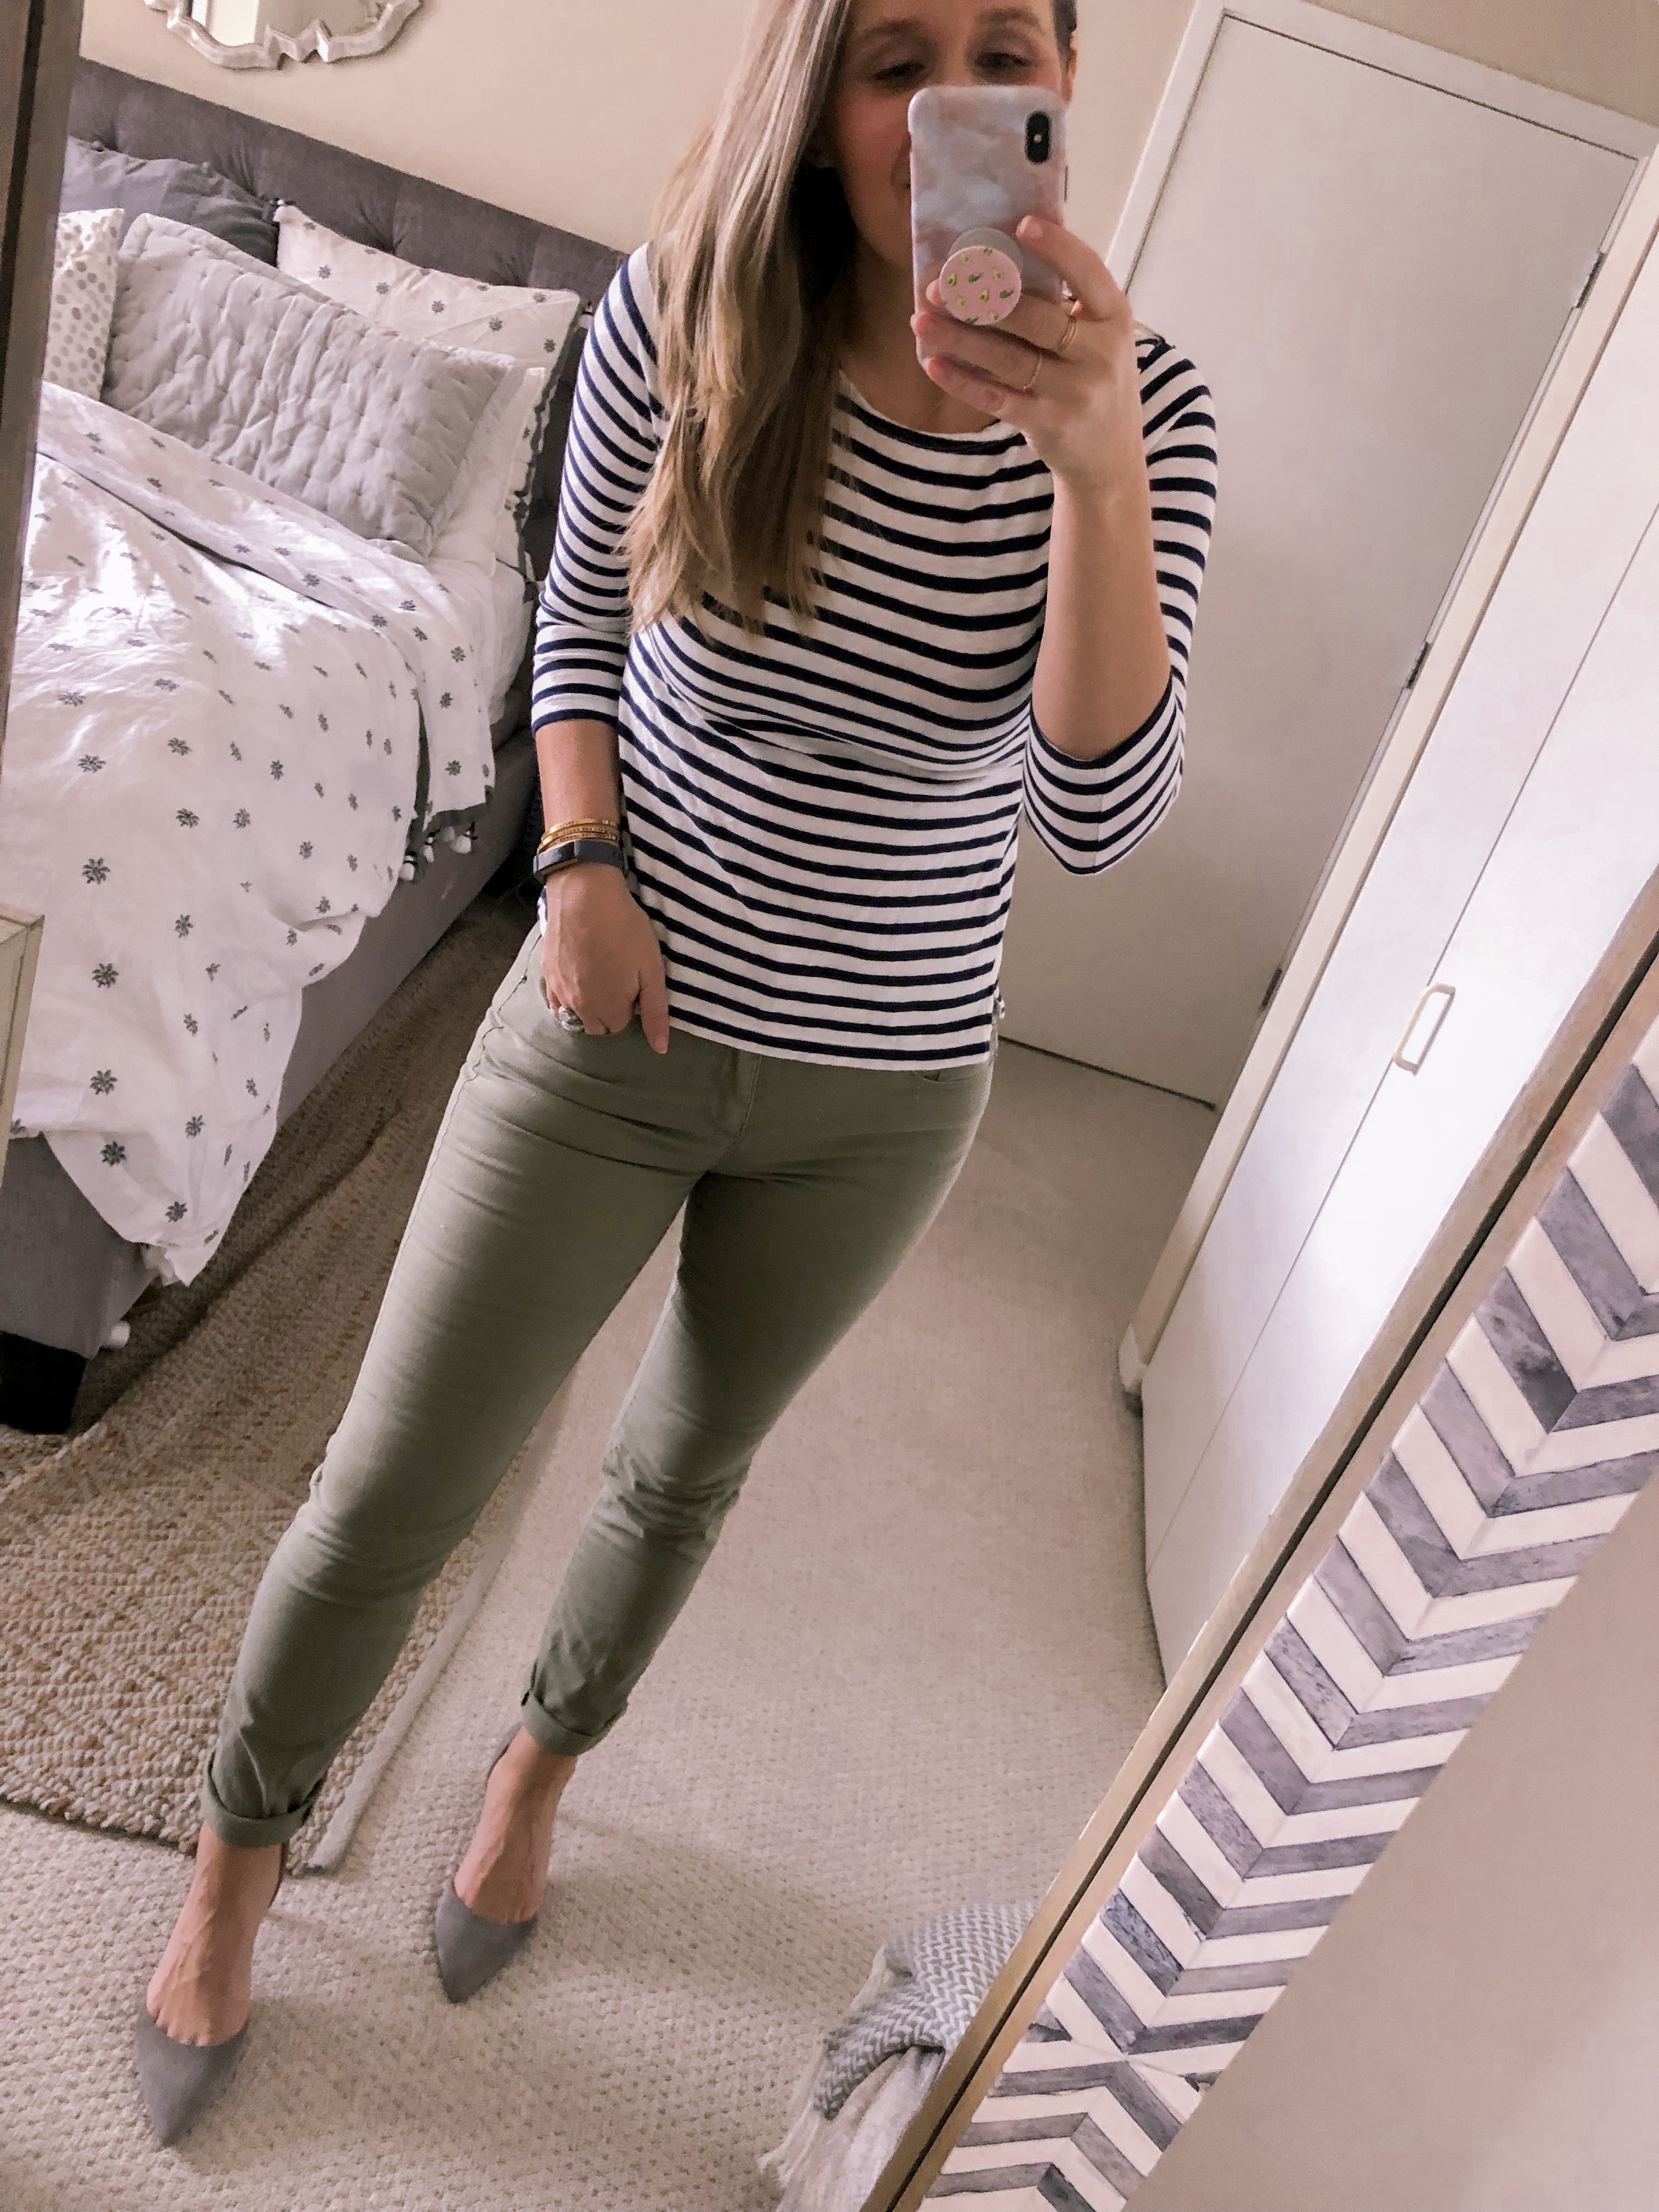 olive green pants and a navy striped top